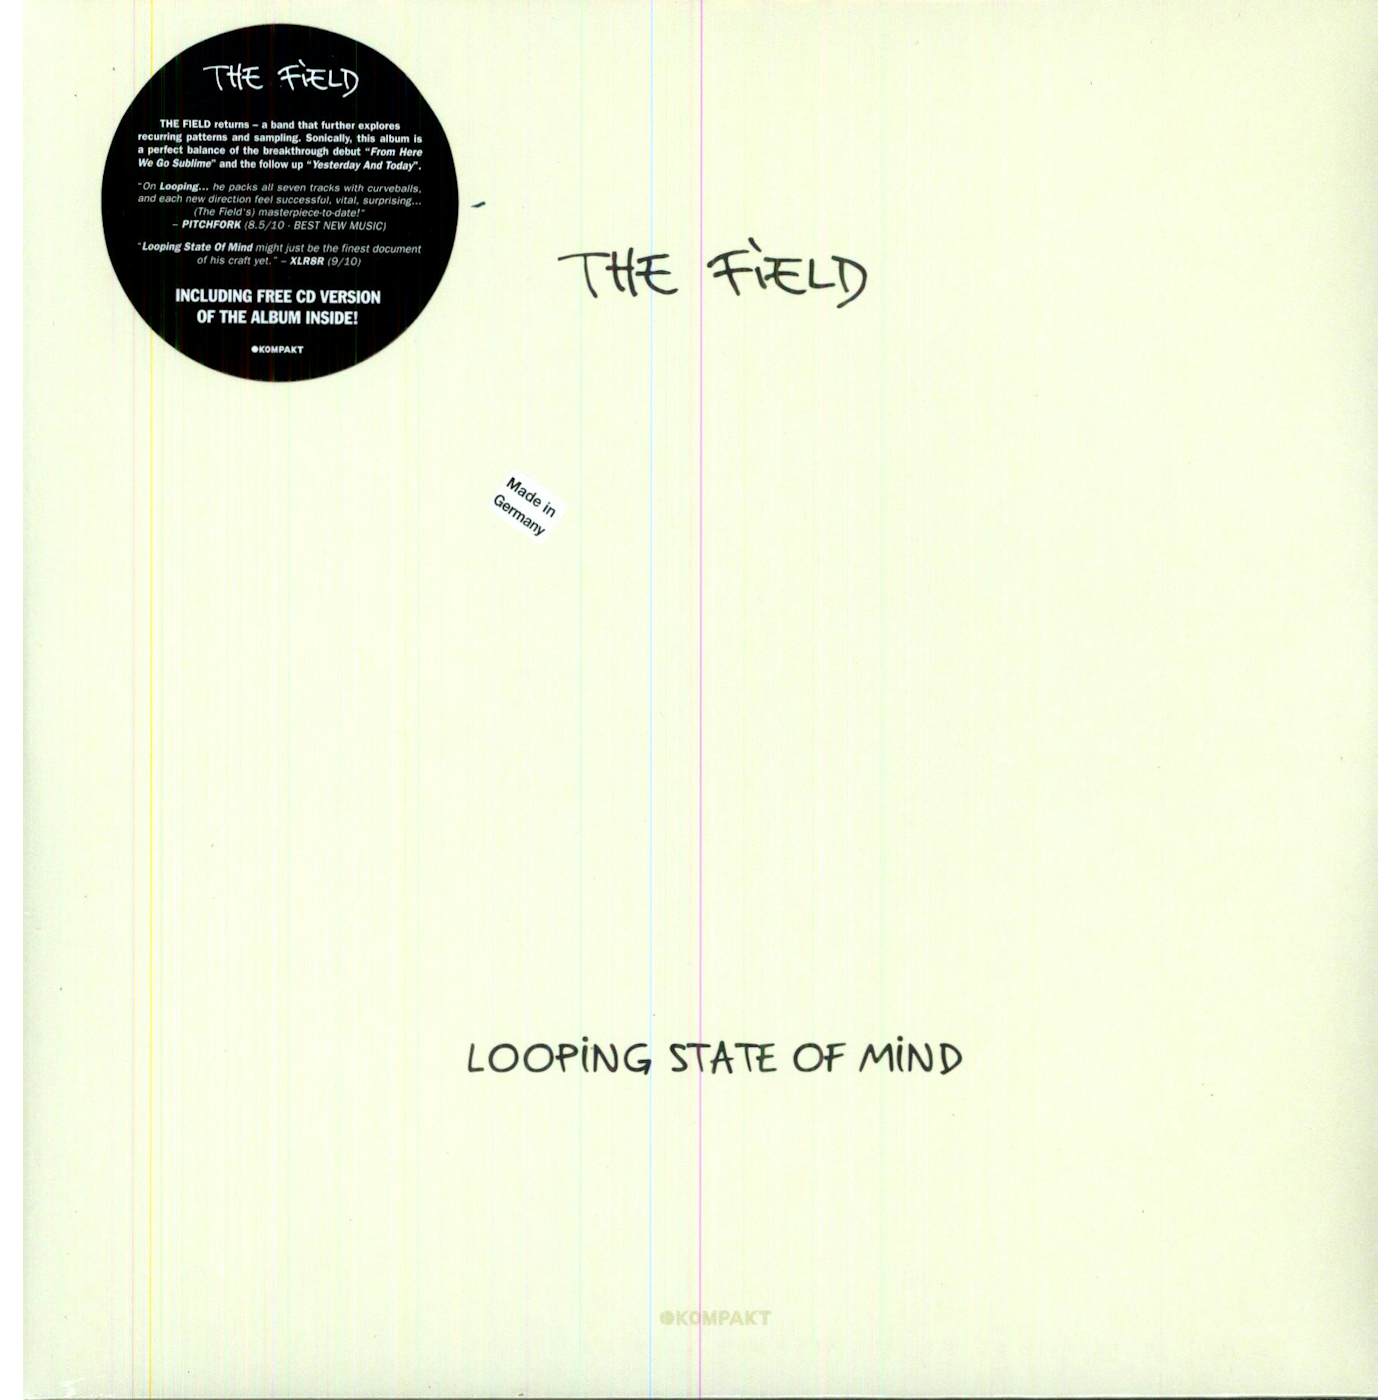 The Field Looping State Of Mind Vinyl Record